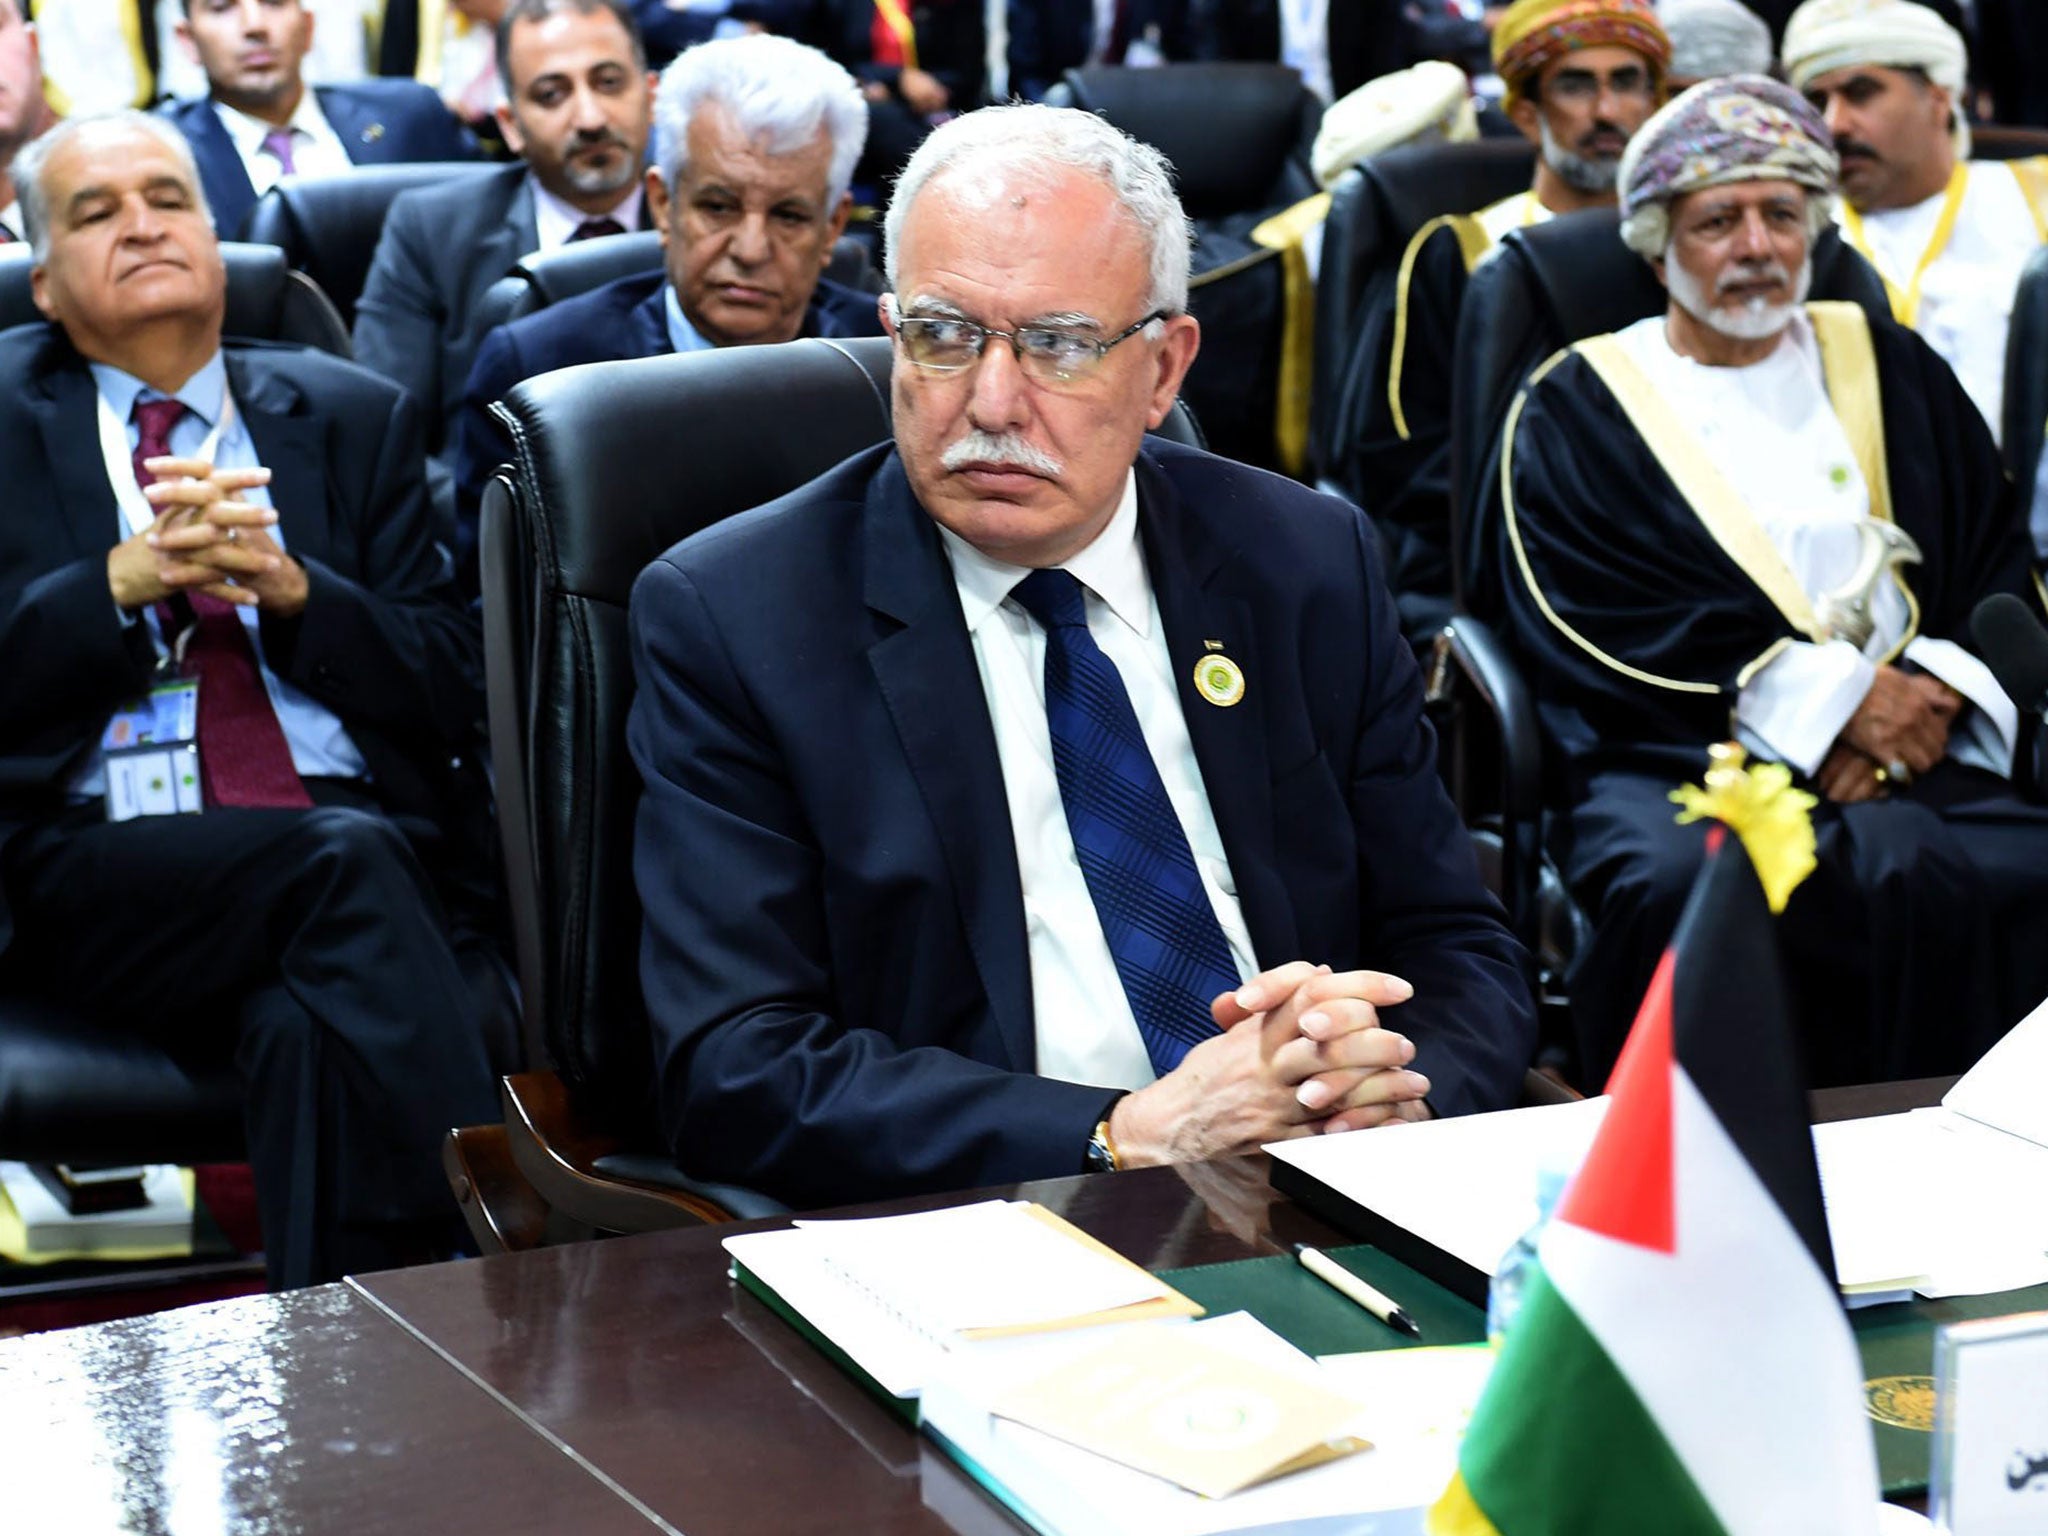 Riyad al-Maliki, the Palestinian foreign minister, delivered the speech on Mahmoud Abbas' behalf during the Arab League summit in Nouakchott, Mauritania, 25 July 2016.